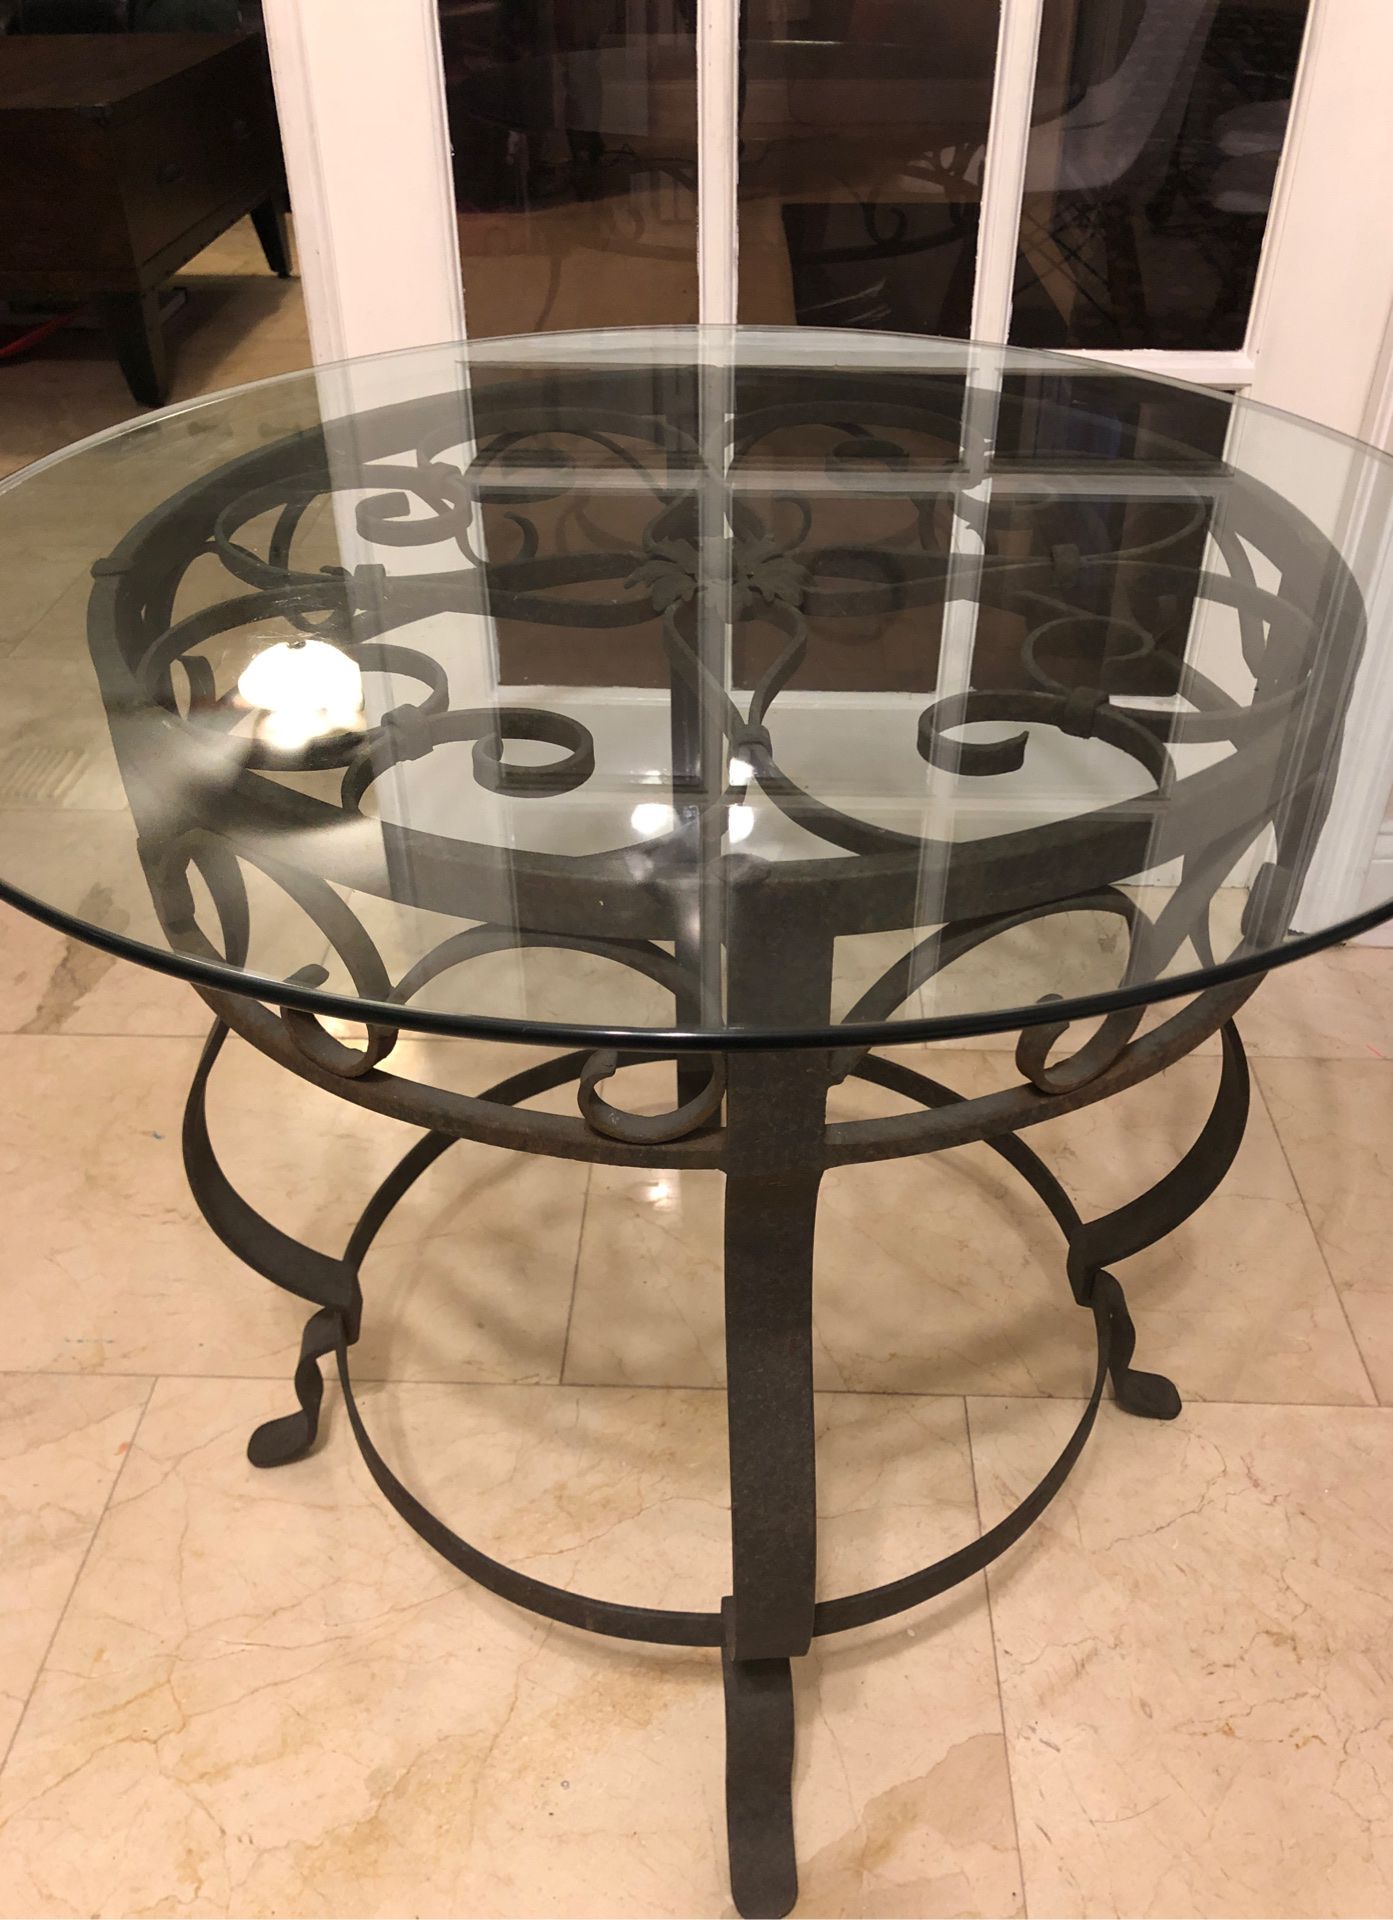 30” Round Glass Top DiningTable, Entry Way Table, Outdoor Table